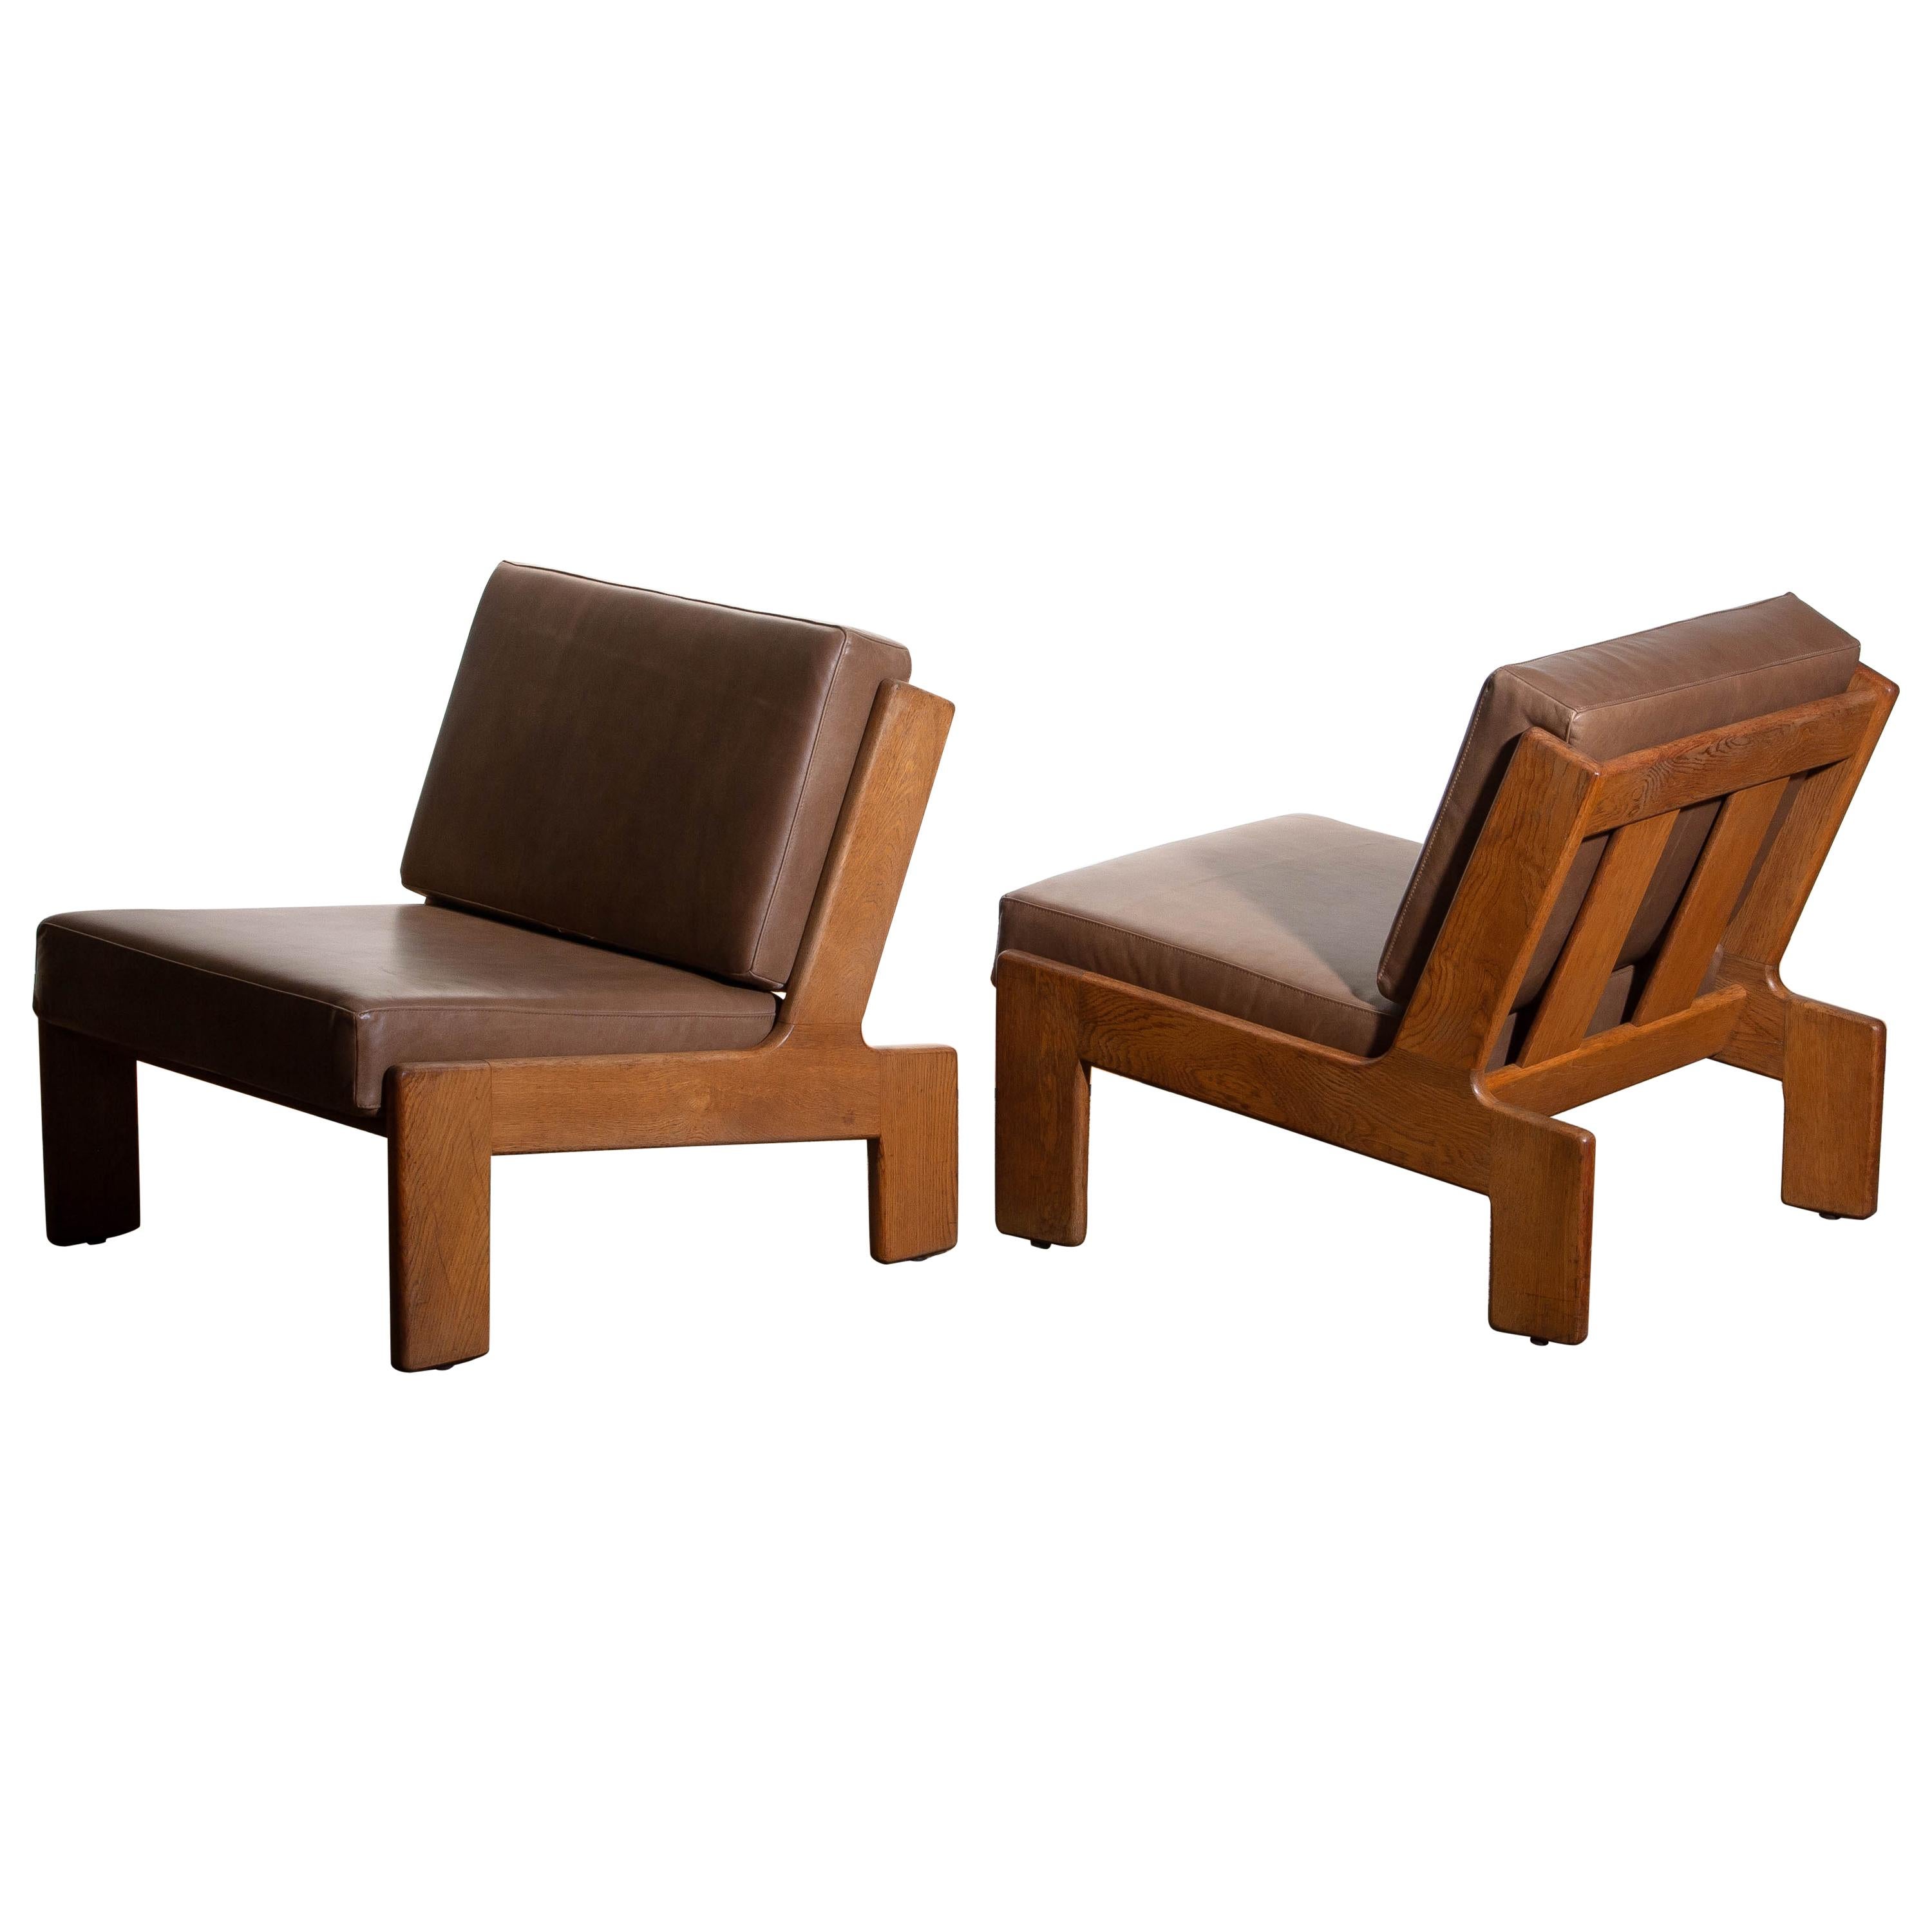 1960s set of two extremely rare cubist lounge /easy chairs designed by Esko Pajamies for Asko Finland in oak and leather.
The cushions of both chairs are newly upholstered with leather. Also the bindings are replaced.
The overall condition of this